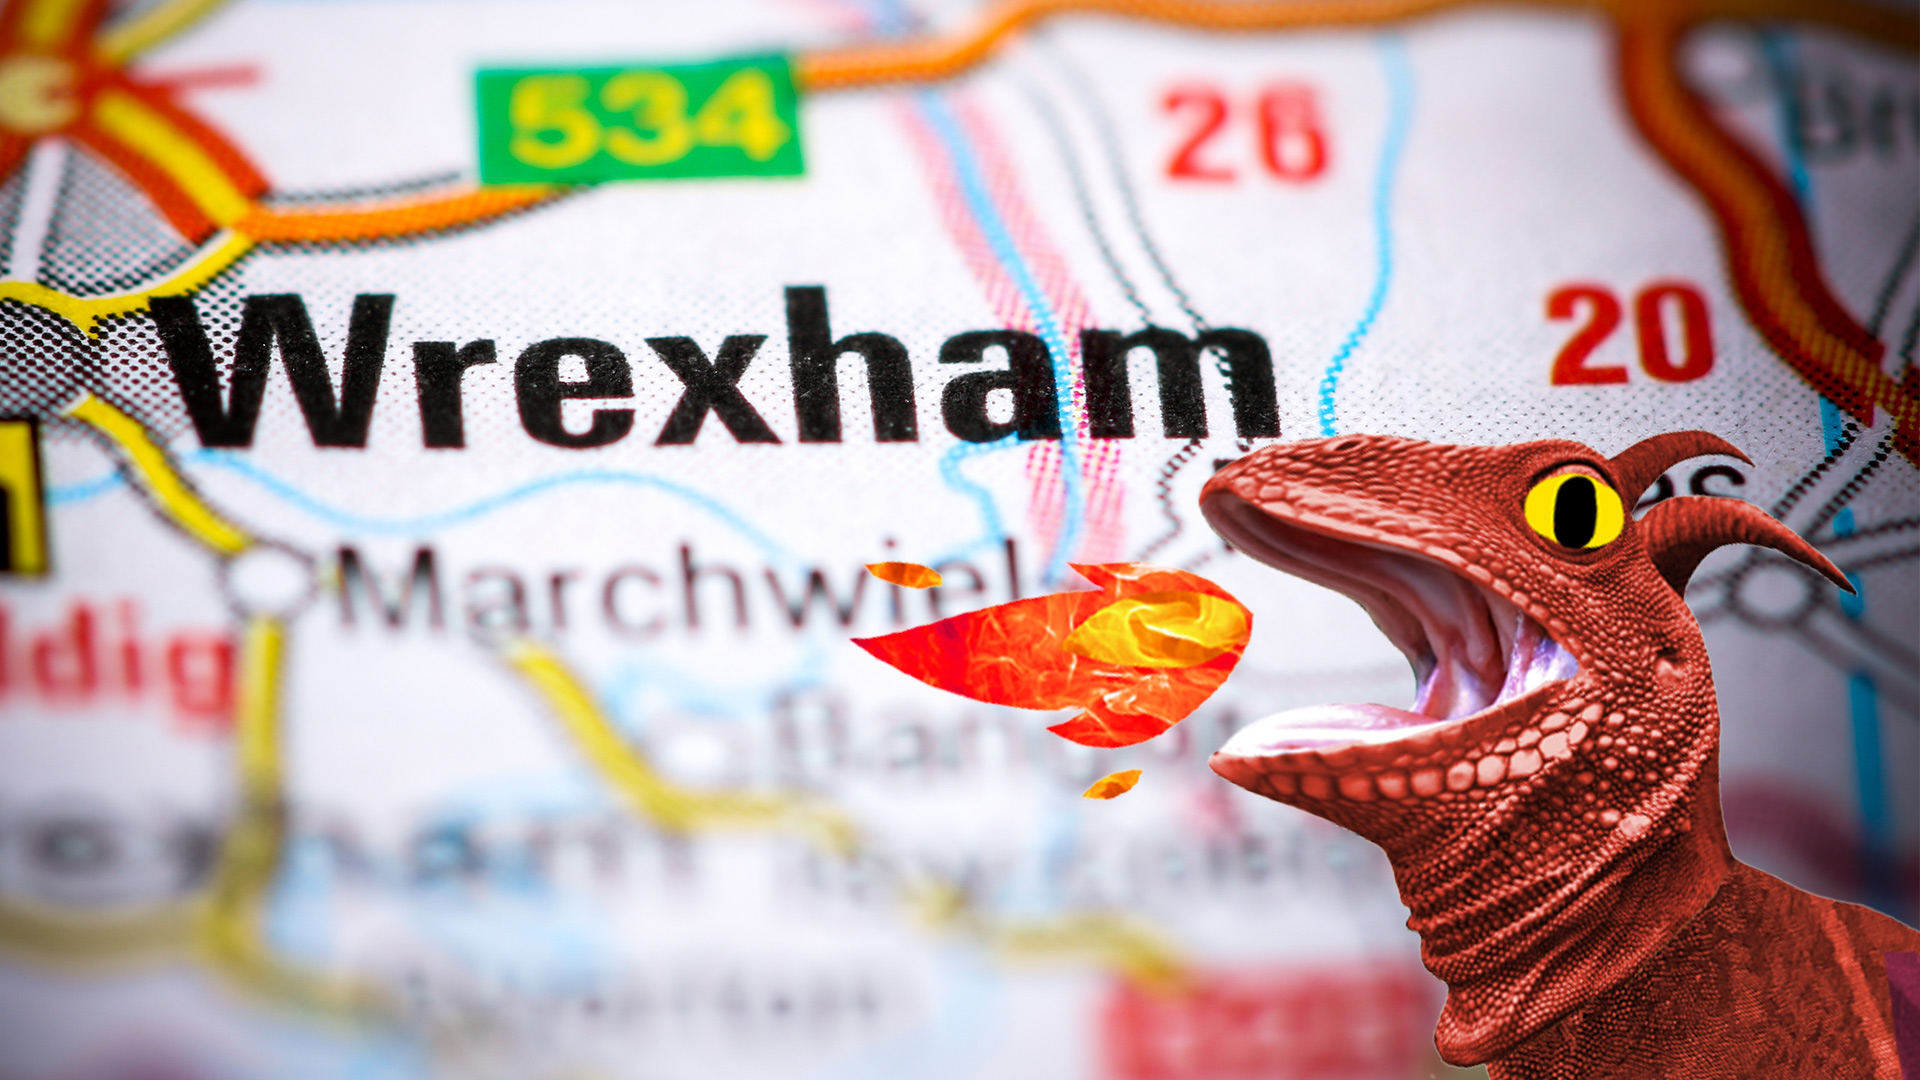 A map of Wrexham